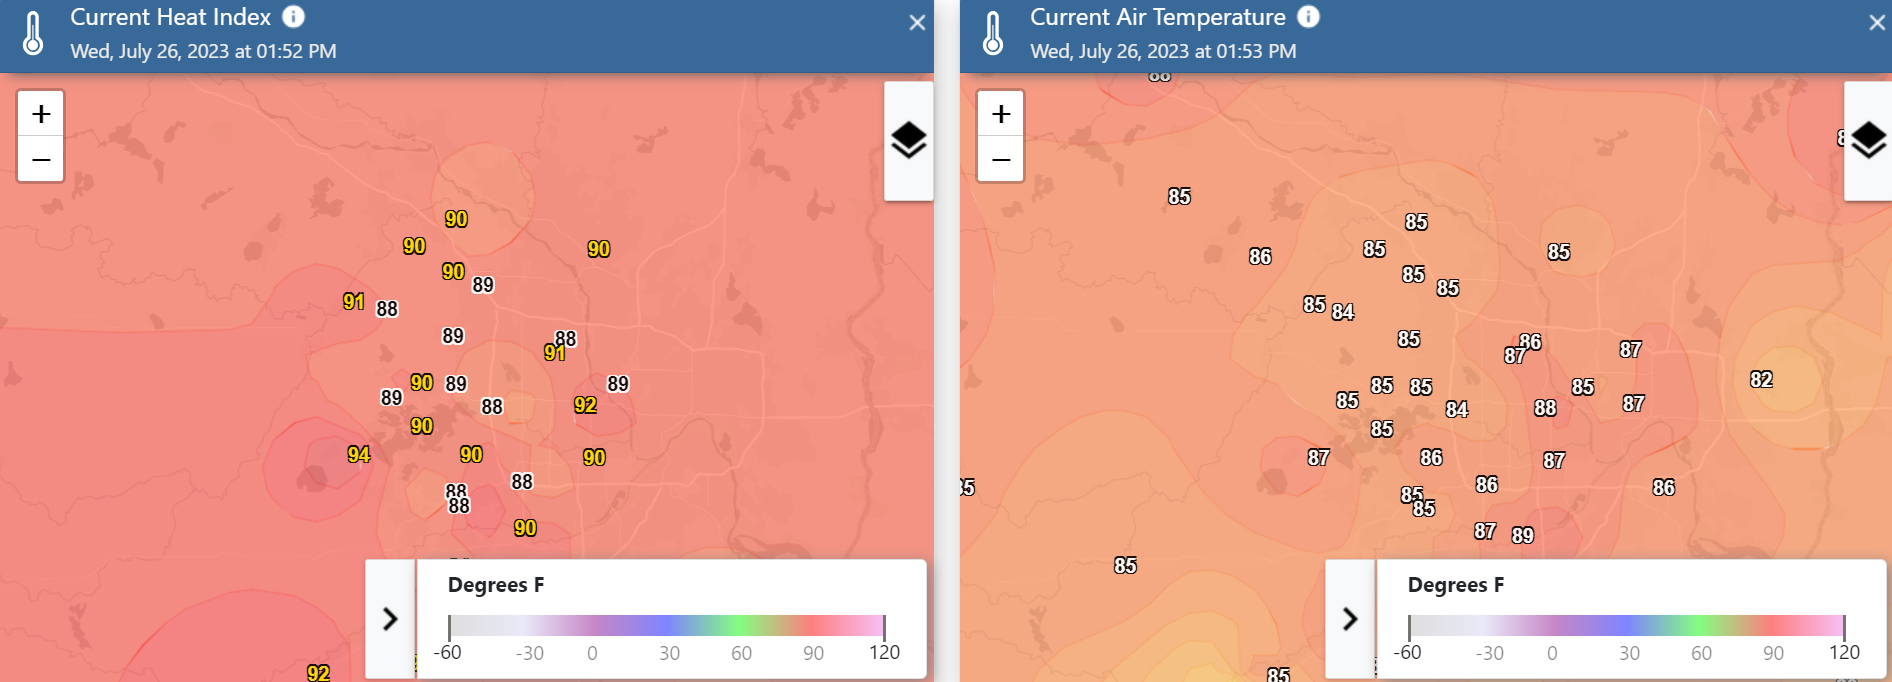 Two maps showing air temperature and heat index on July 26, 2023 at 2PM.